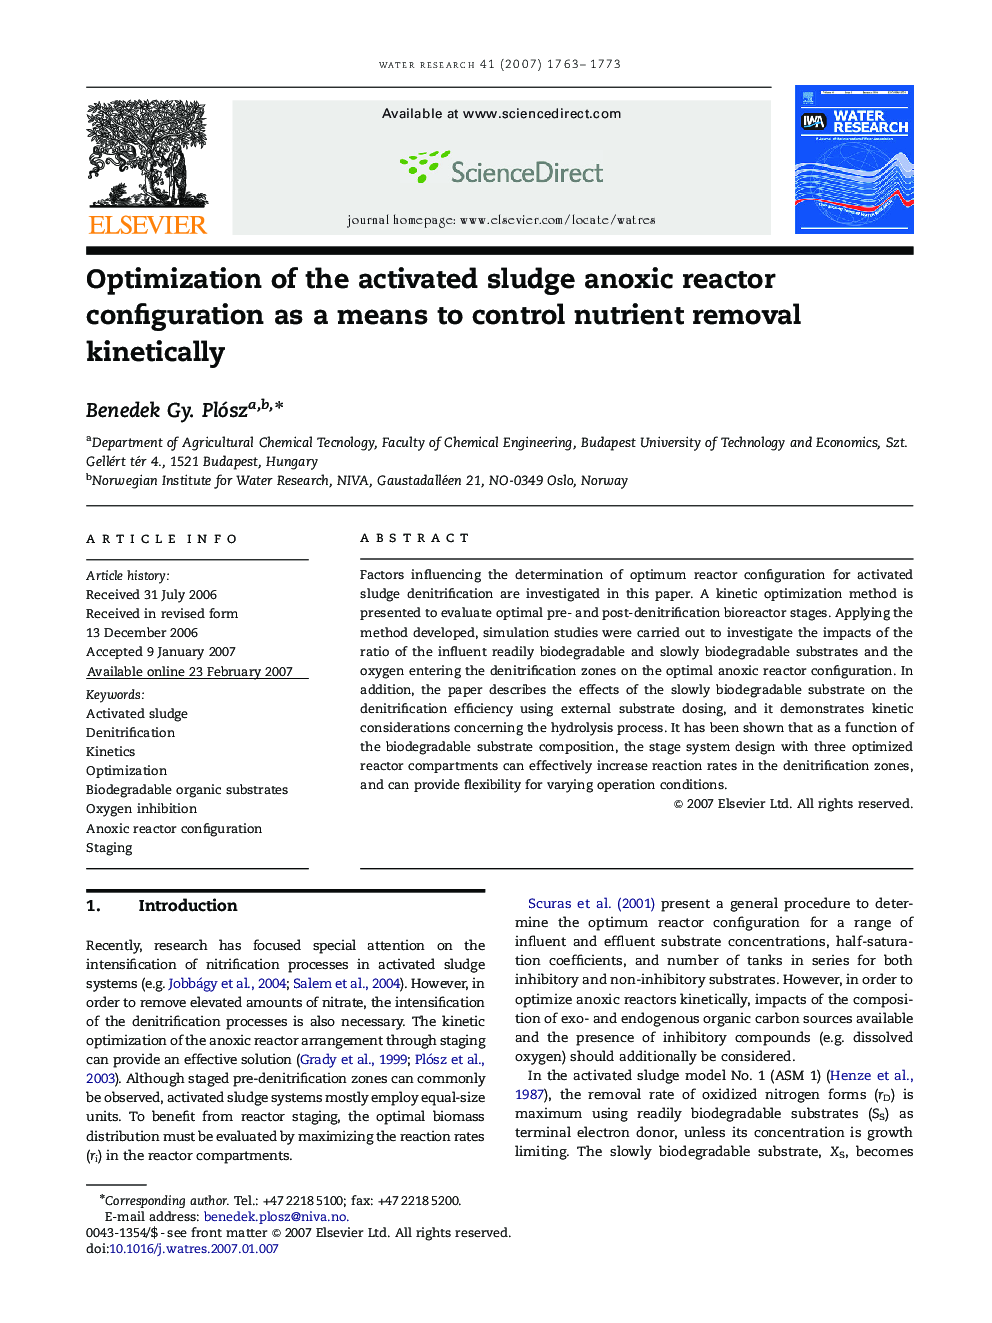 Optimization of the activated sludge anoxic reactor configuration as a means to control nutrient removal kinetically